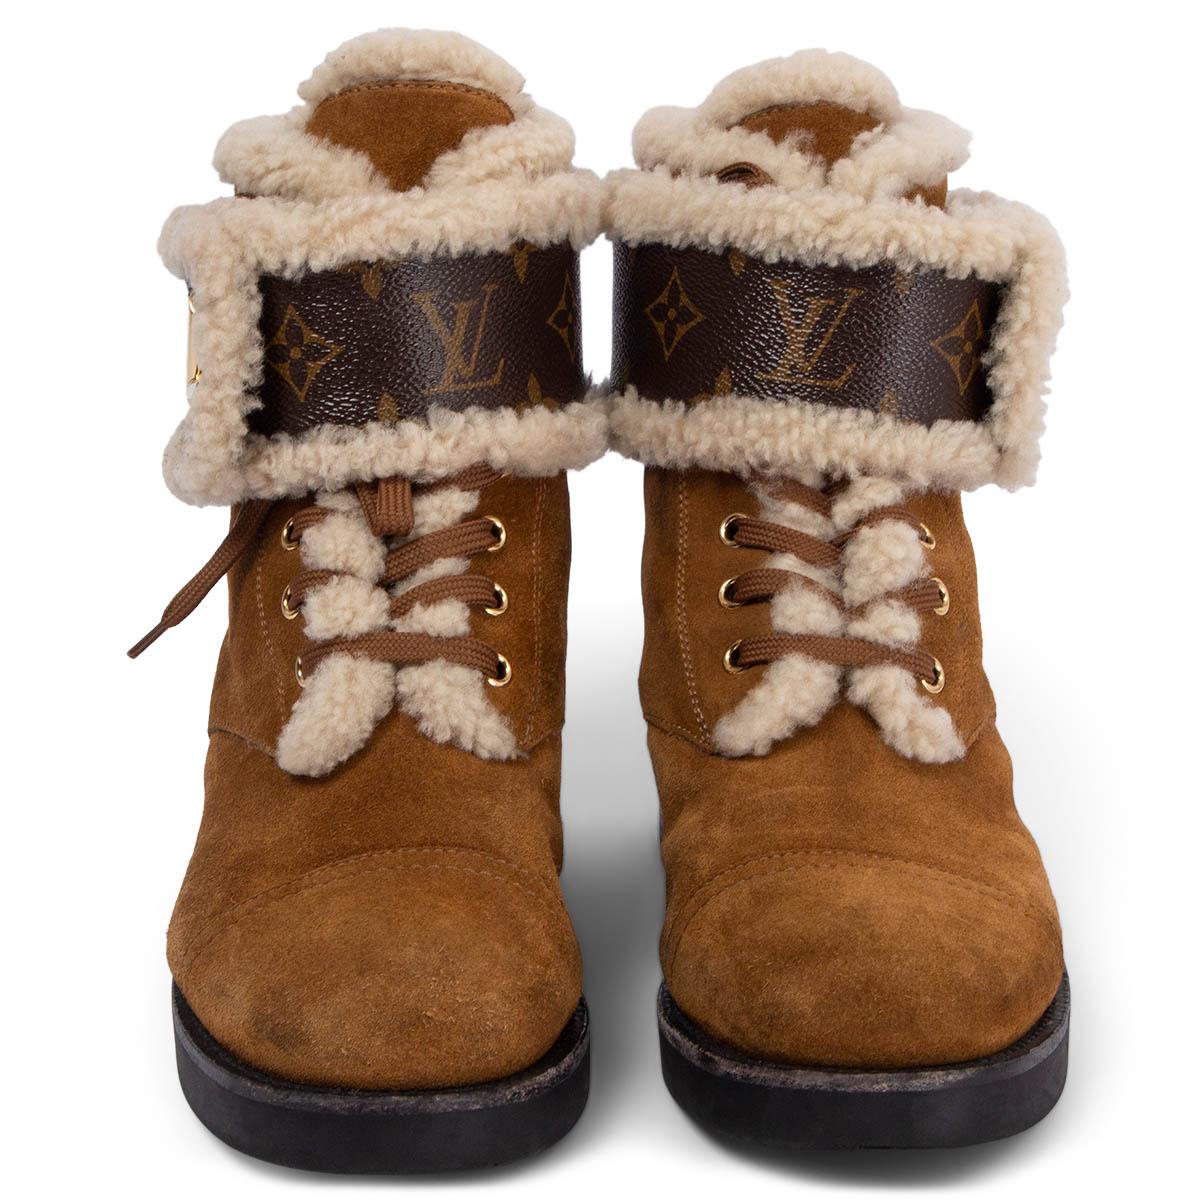 100% authentic Louis Vuitton Ranger Wonderland lace-up boots in camel suede featuring off-white shearling lining and trimming. Close with the classic LC twist lock buckle in gold-tone metal and monogram strap. The boots are set on a stacked heel and